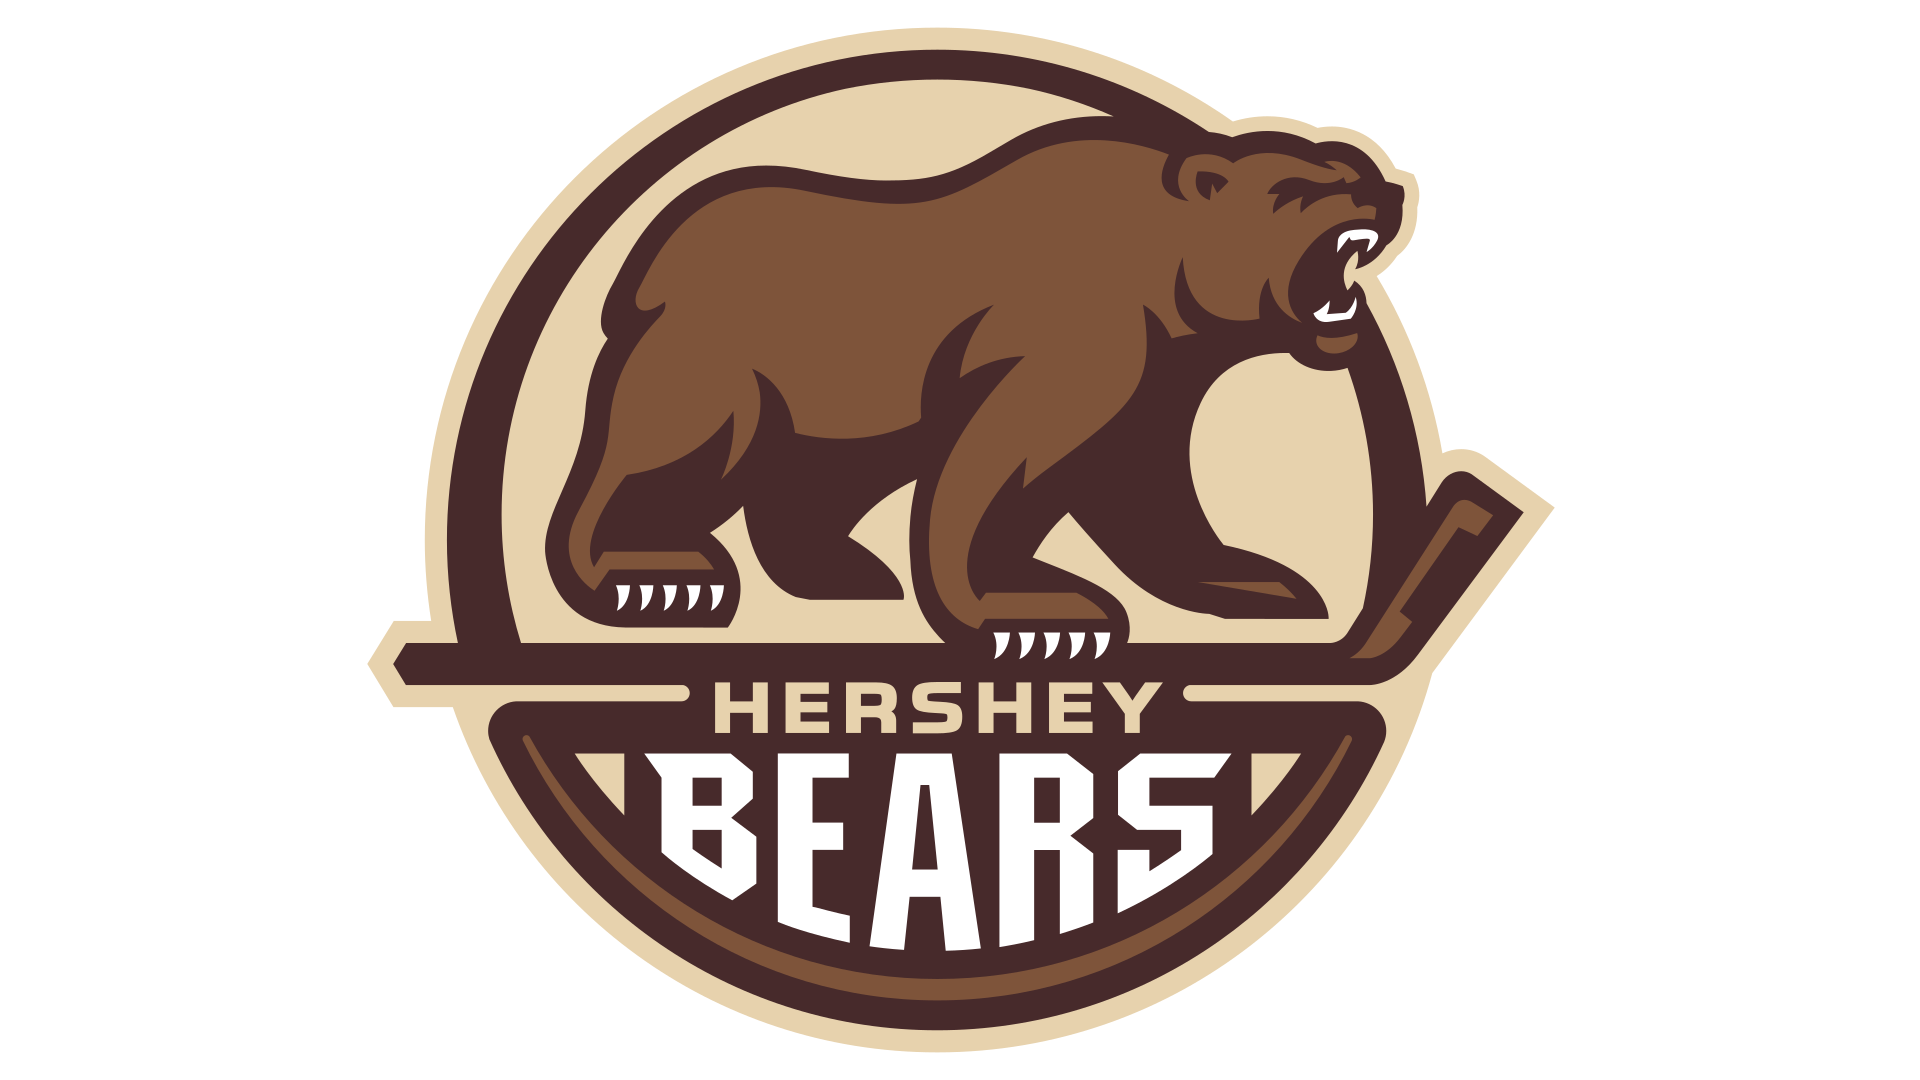 Chicago Bears Logo PNG Image HD